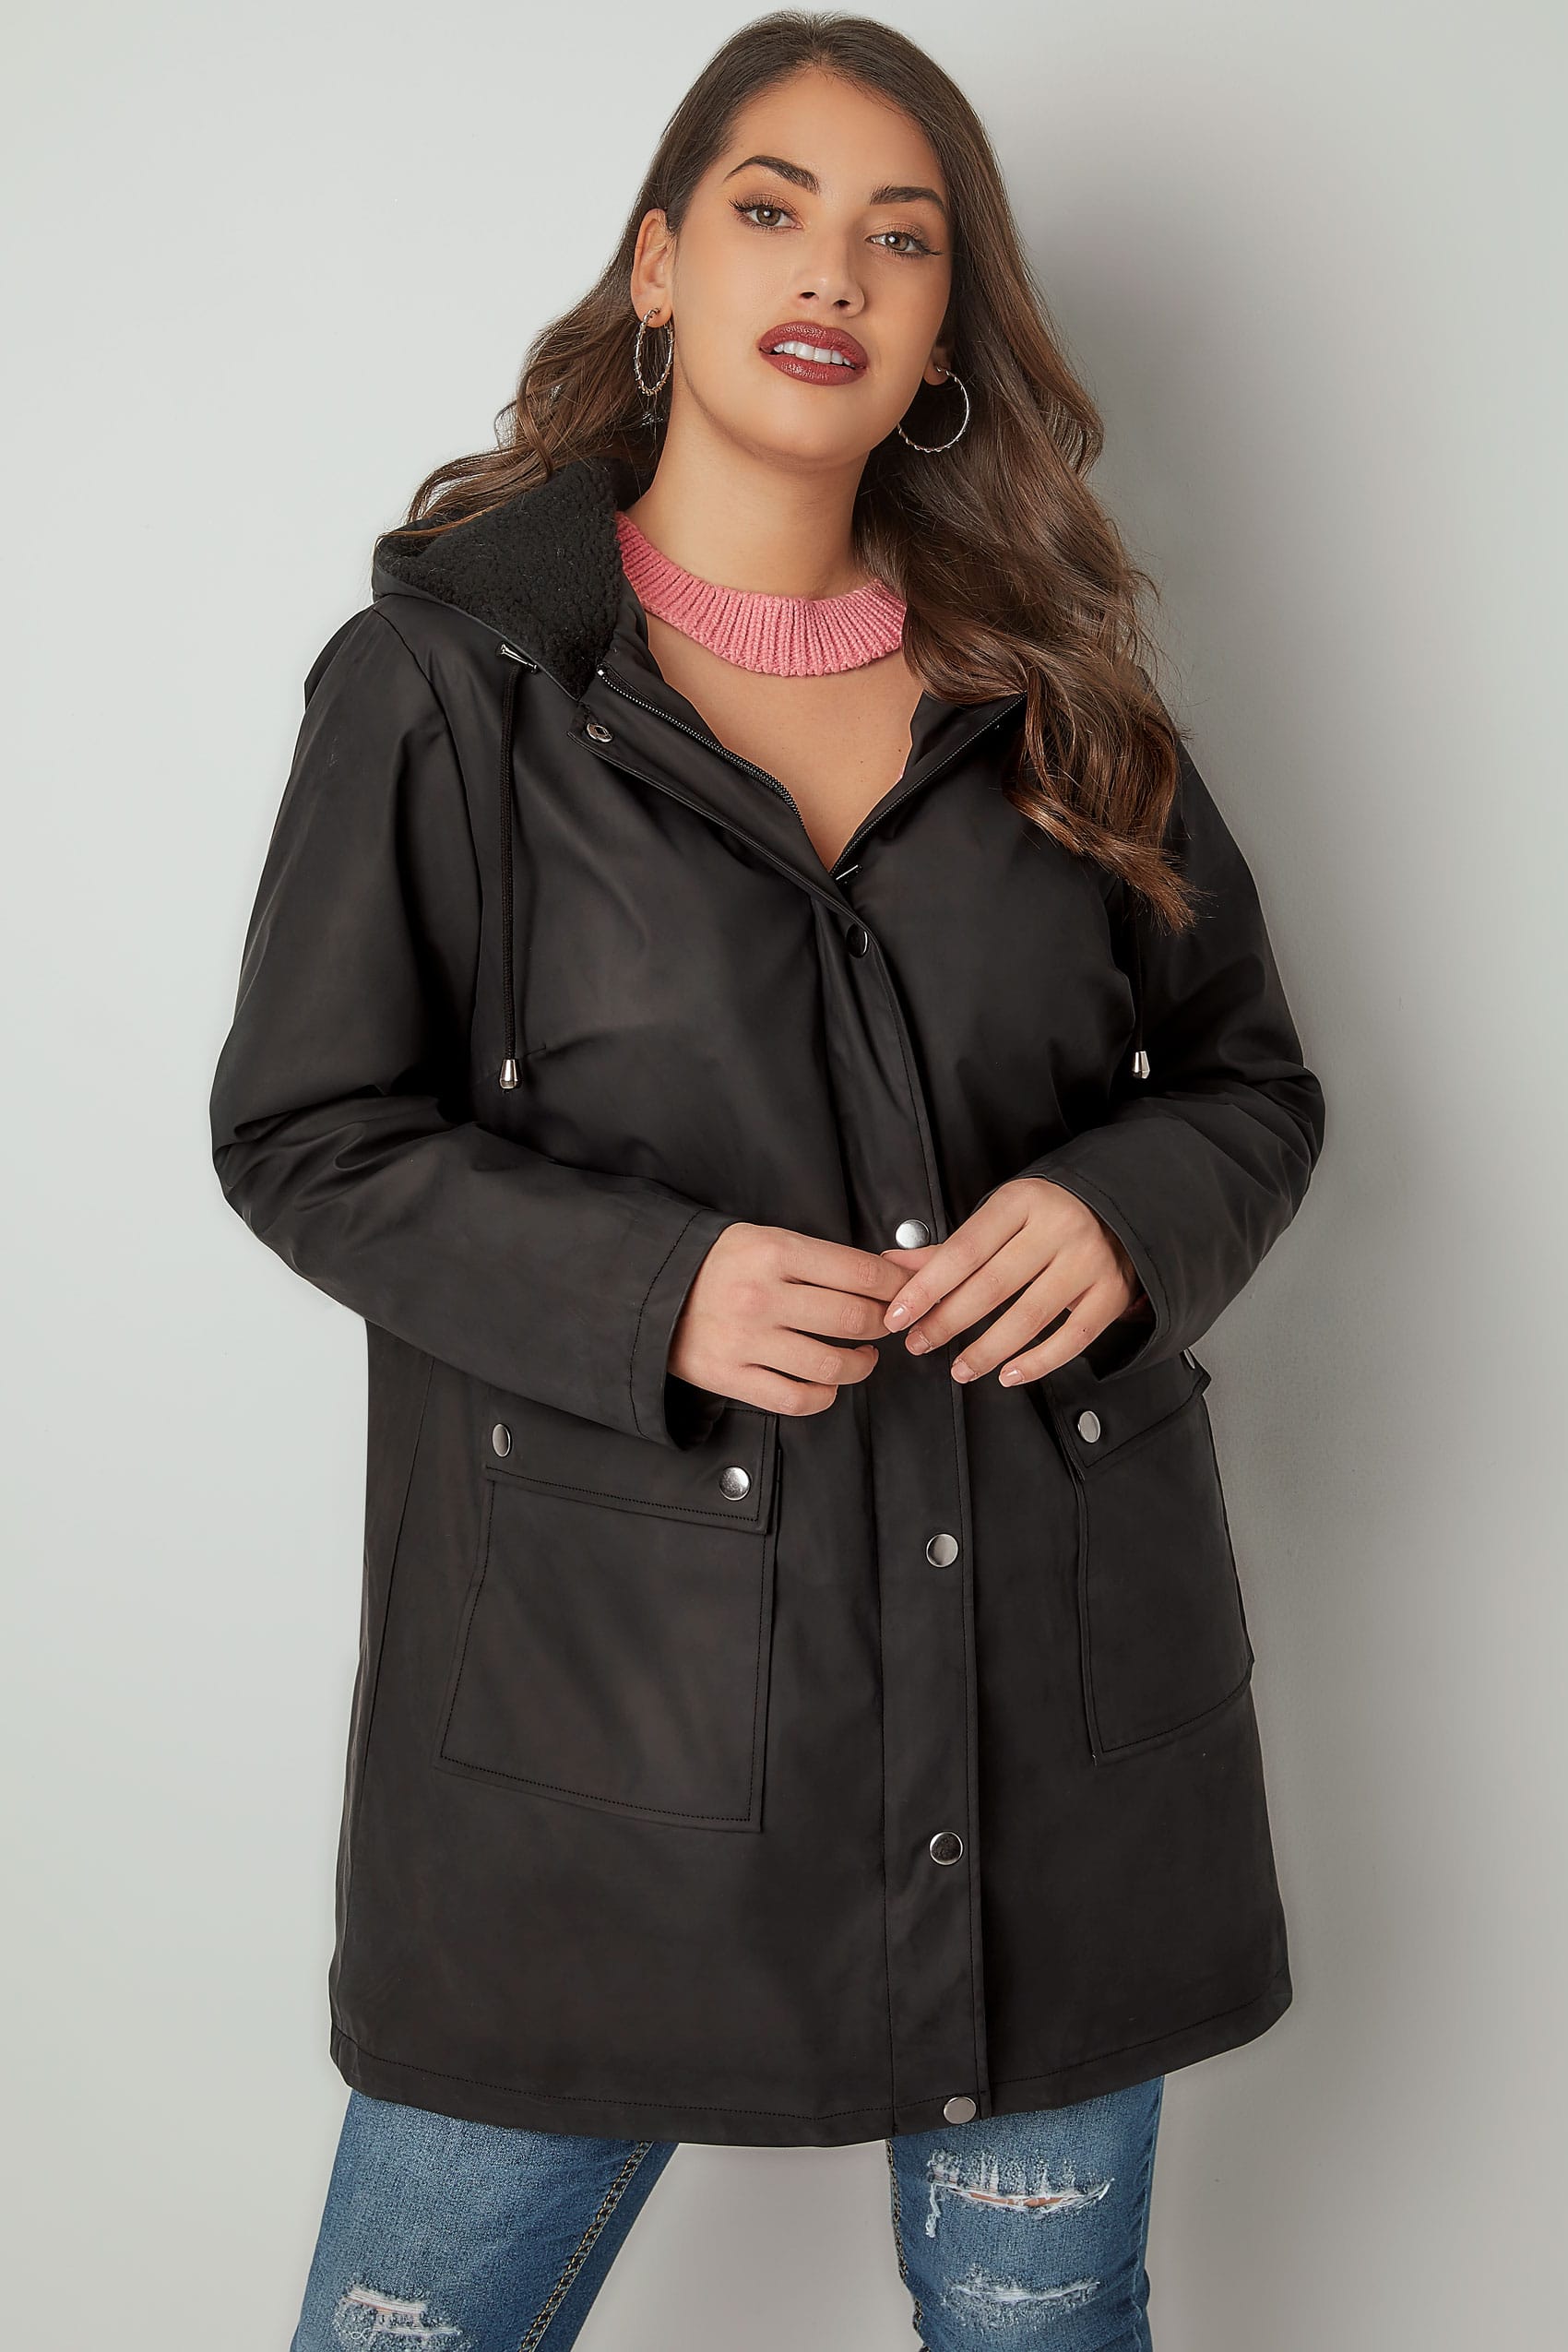 LIMITED COLLECTION Black Coated Mac With Sherpa Lined Hood, Plus size ...